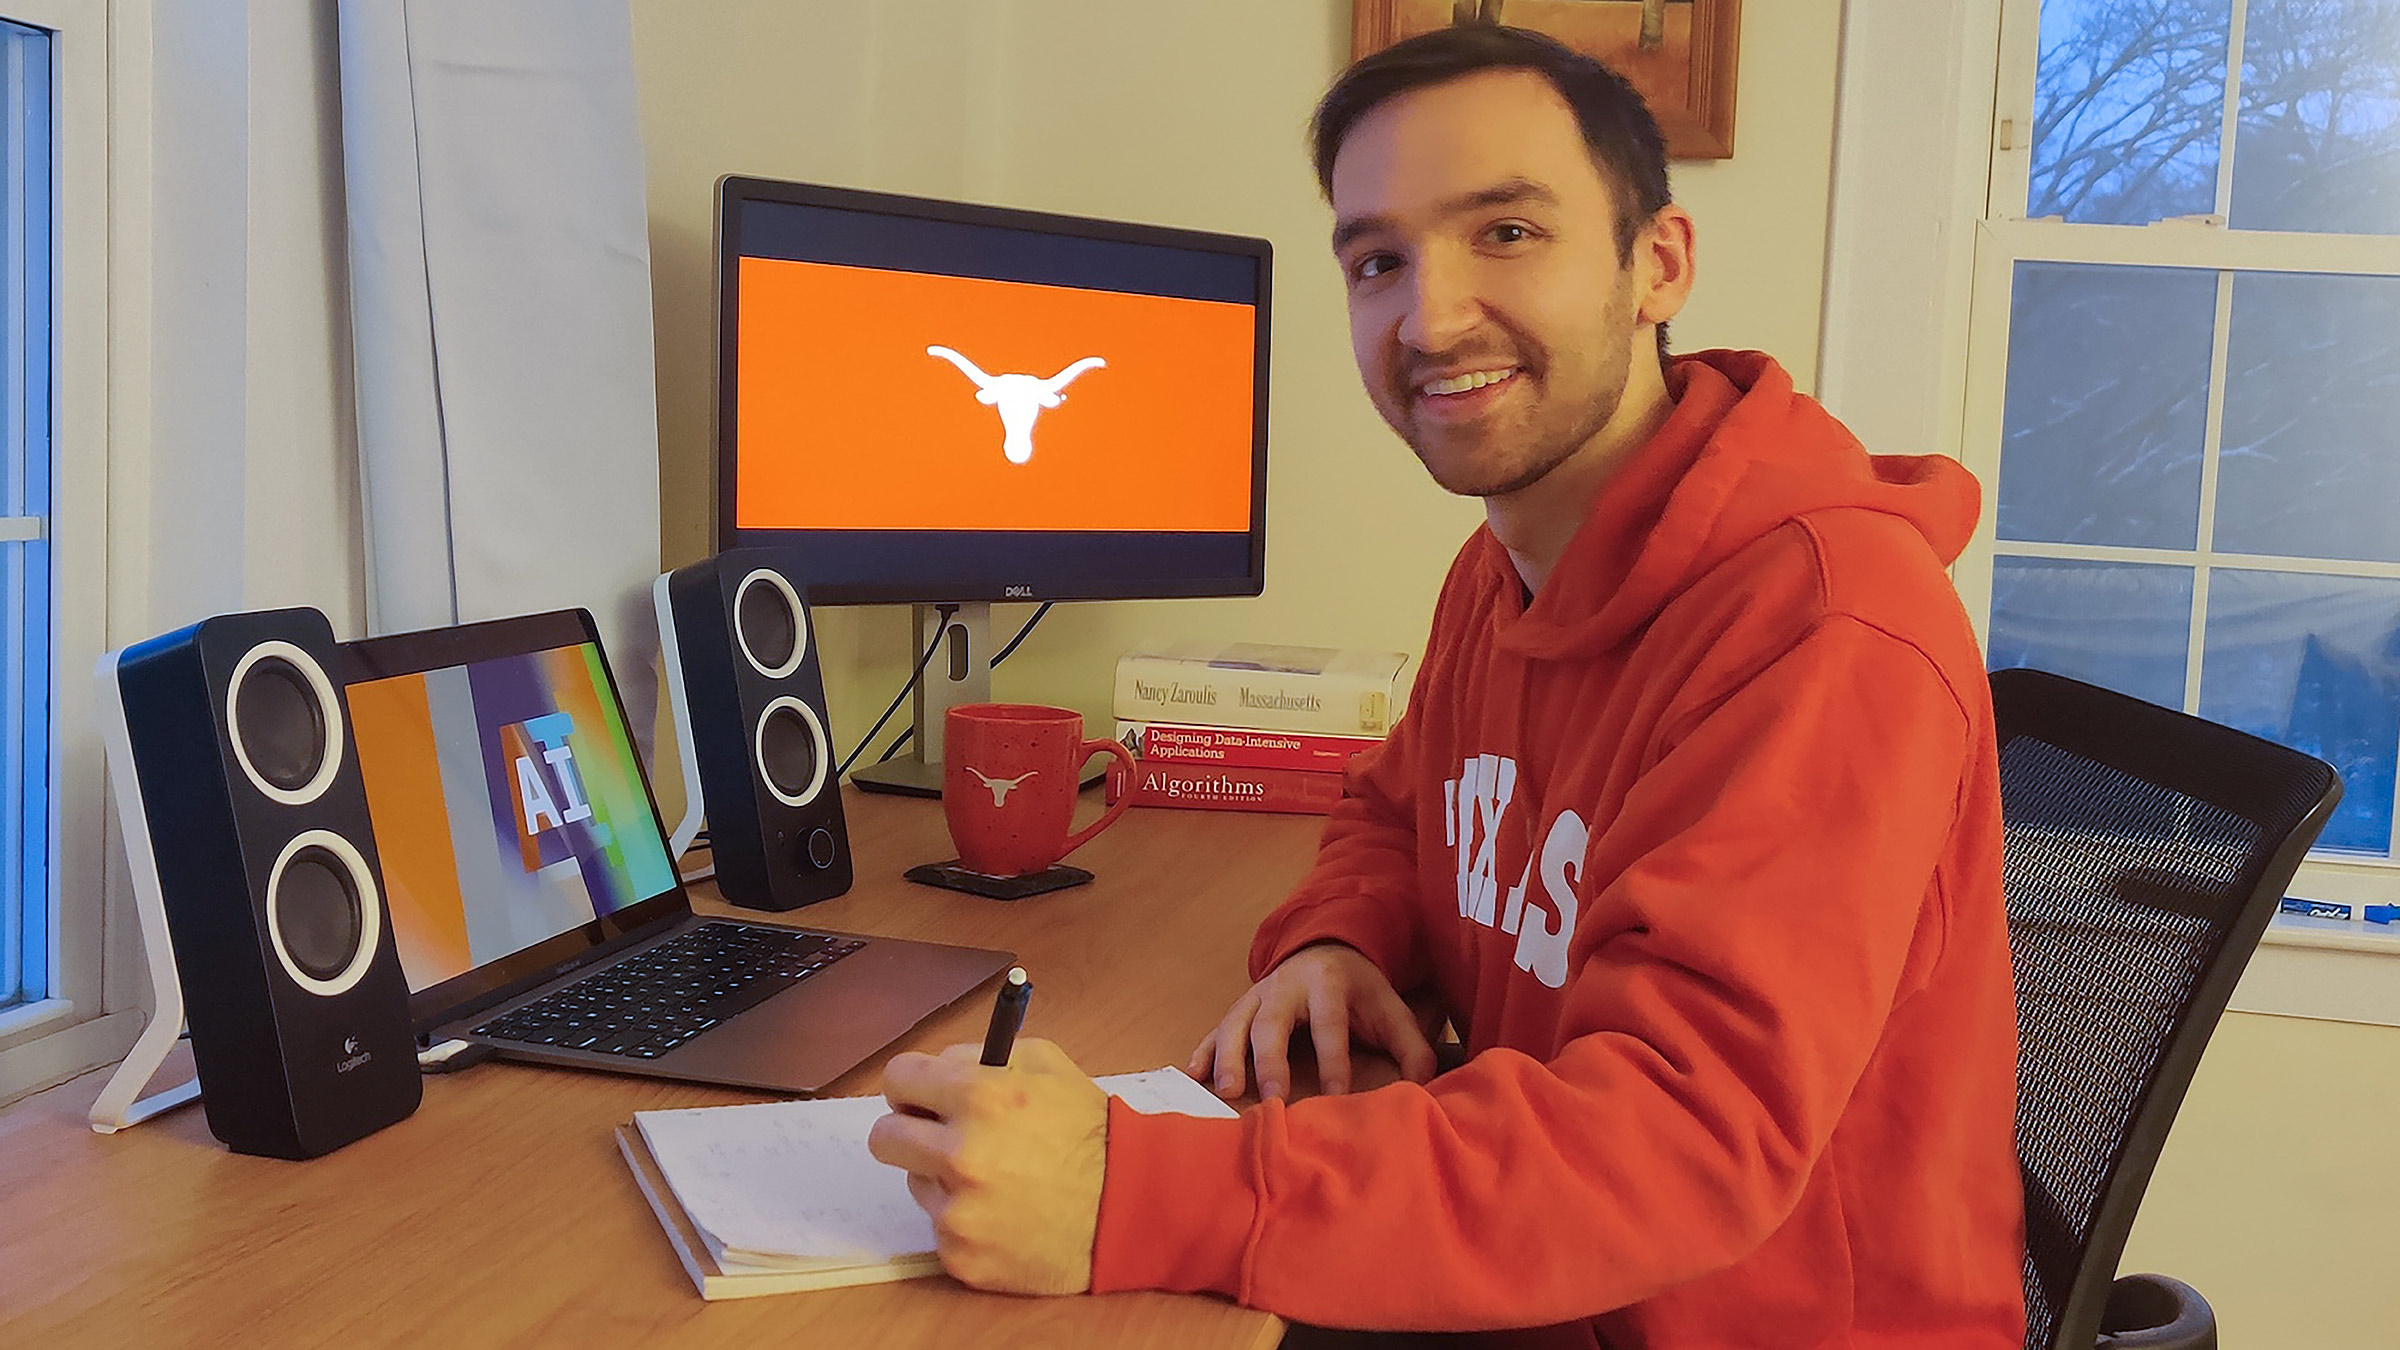 A student wearing a UT sweatshirt sits at a desk with Essentials of AI and a Longhorn silhouette displayed on two screens